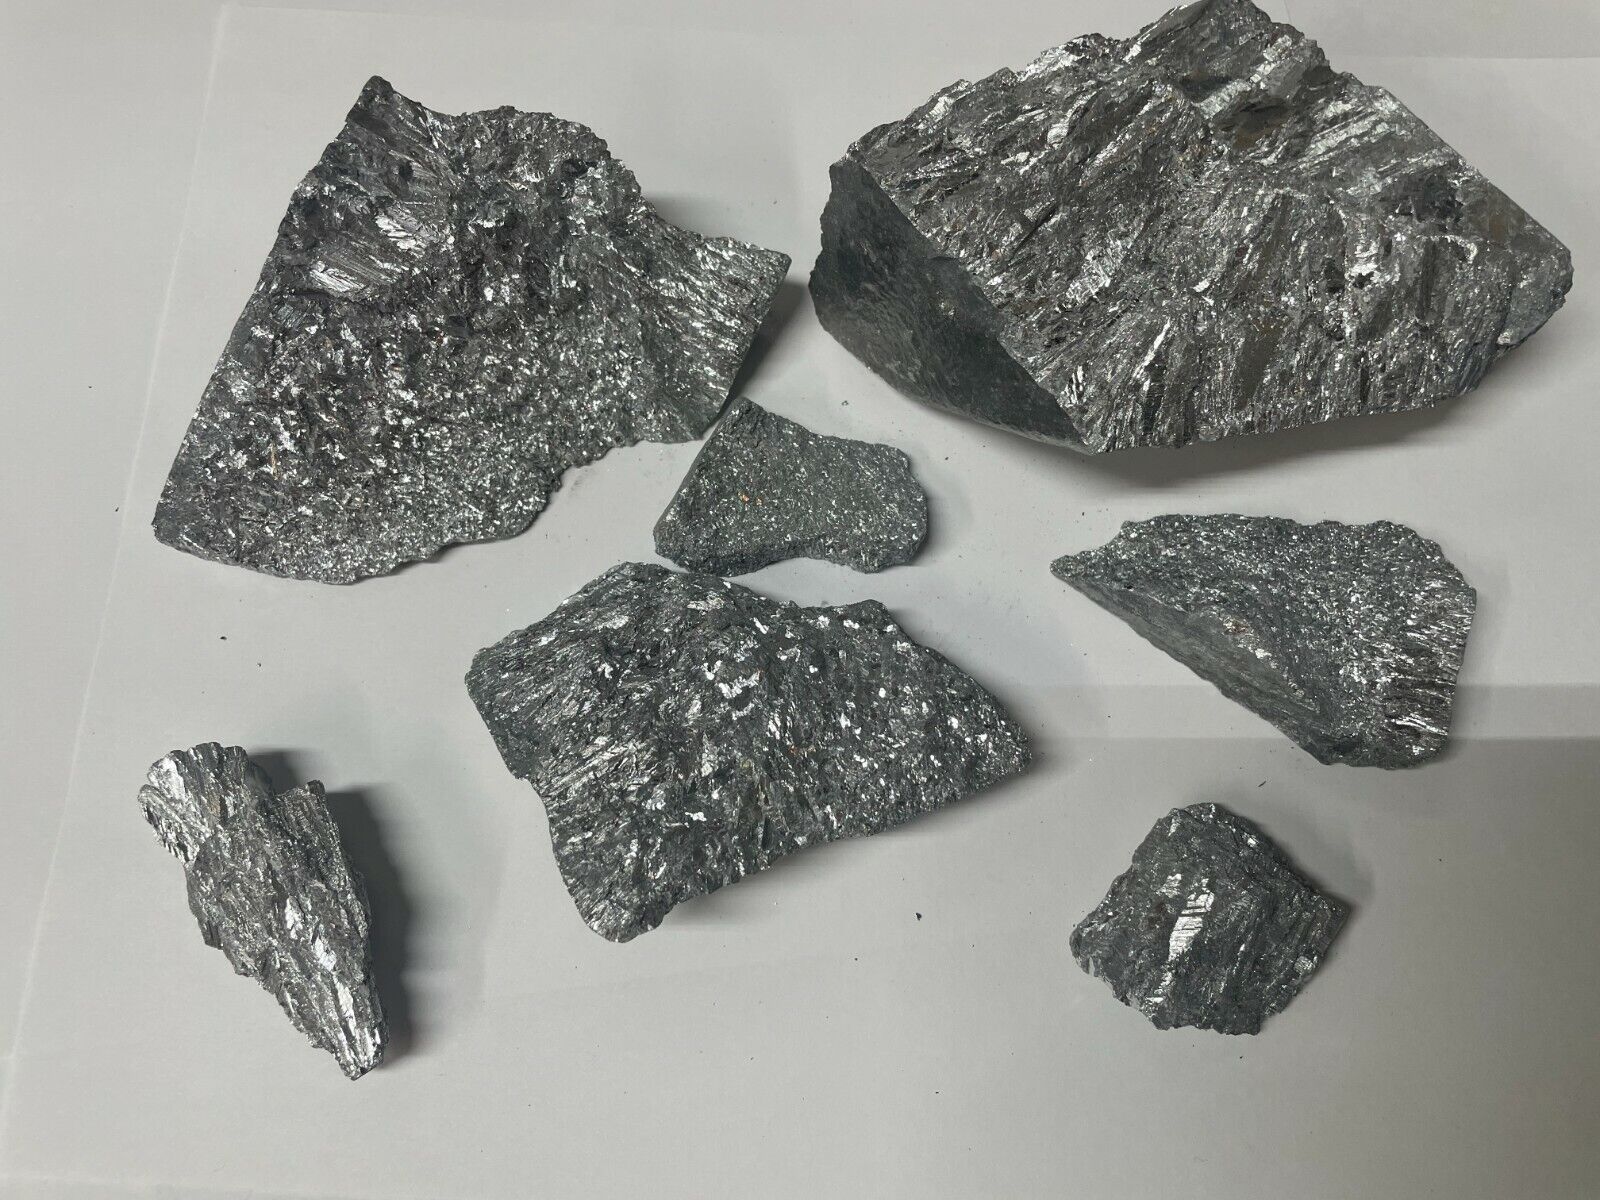 Antimony Metal Sb 99.9+% Pure 50g+ Chunks Periodic Table Element (Fast Shipping)